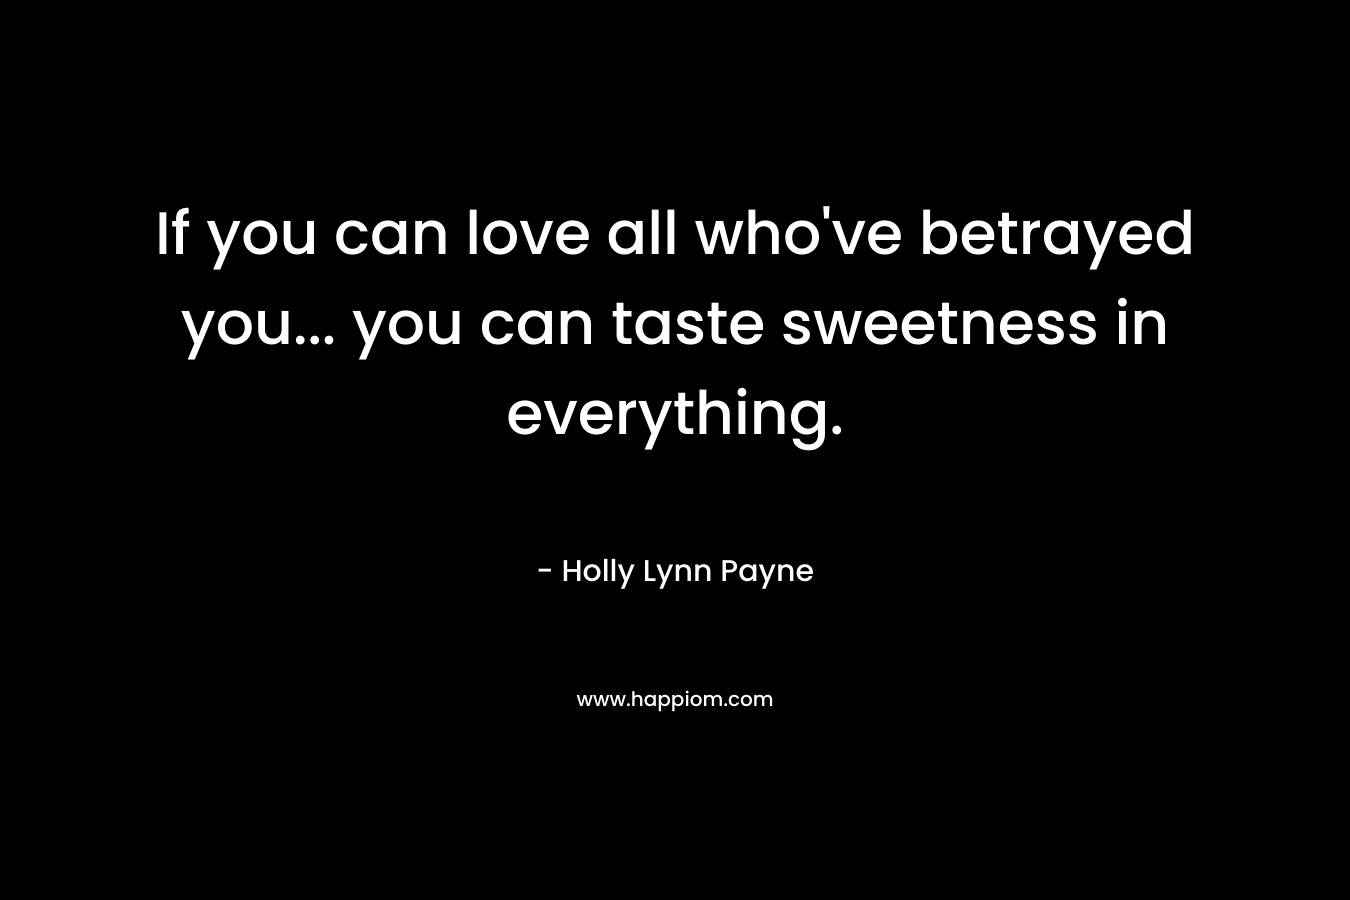 If you can love all who've betrayed you... you can taste sweetness in everything.